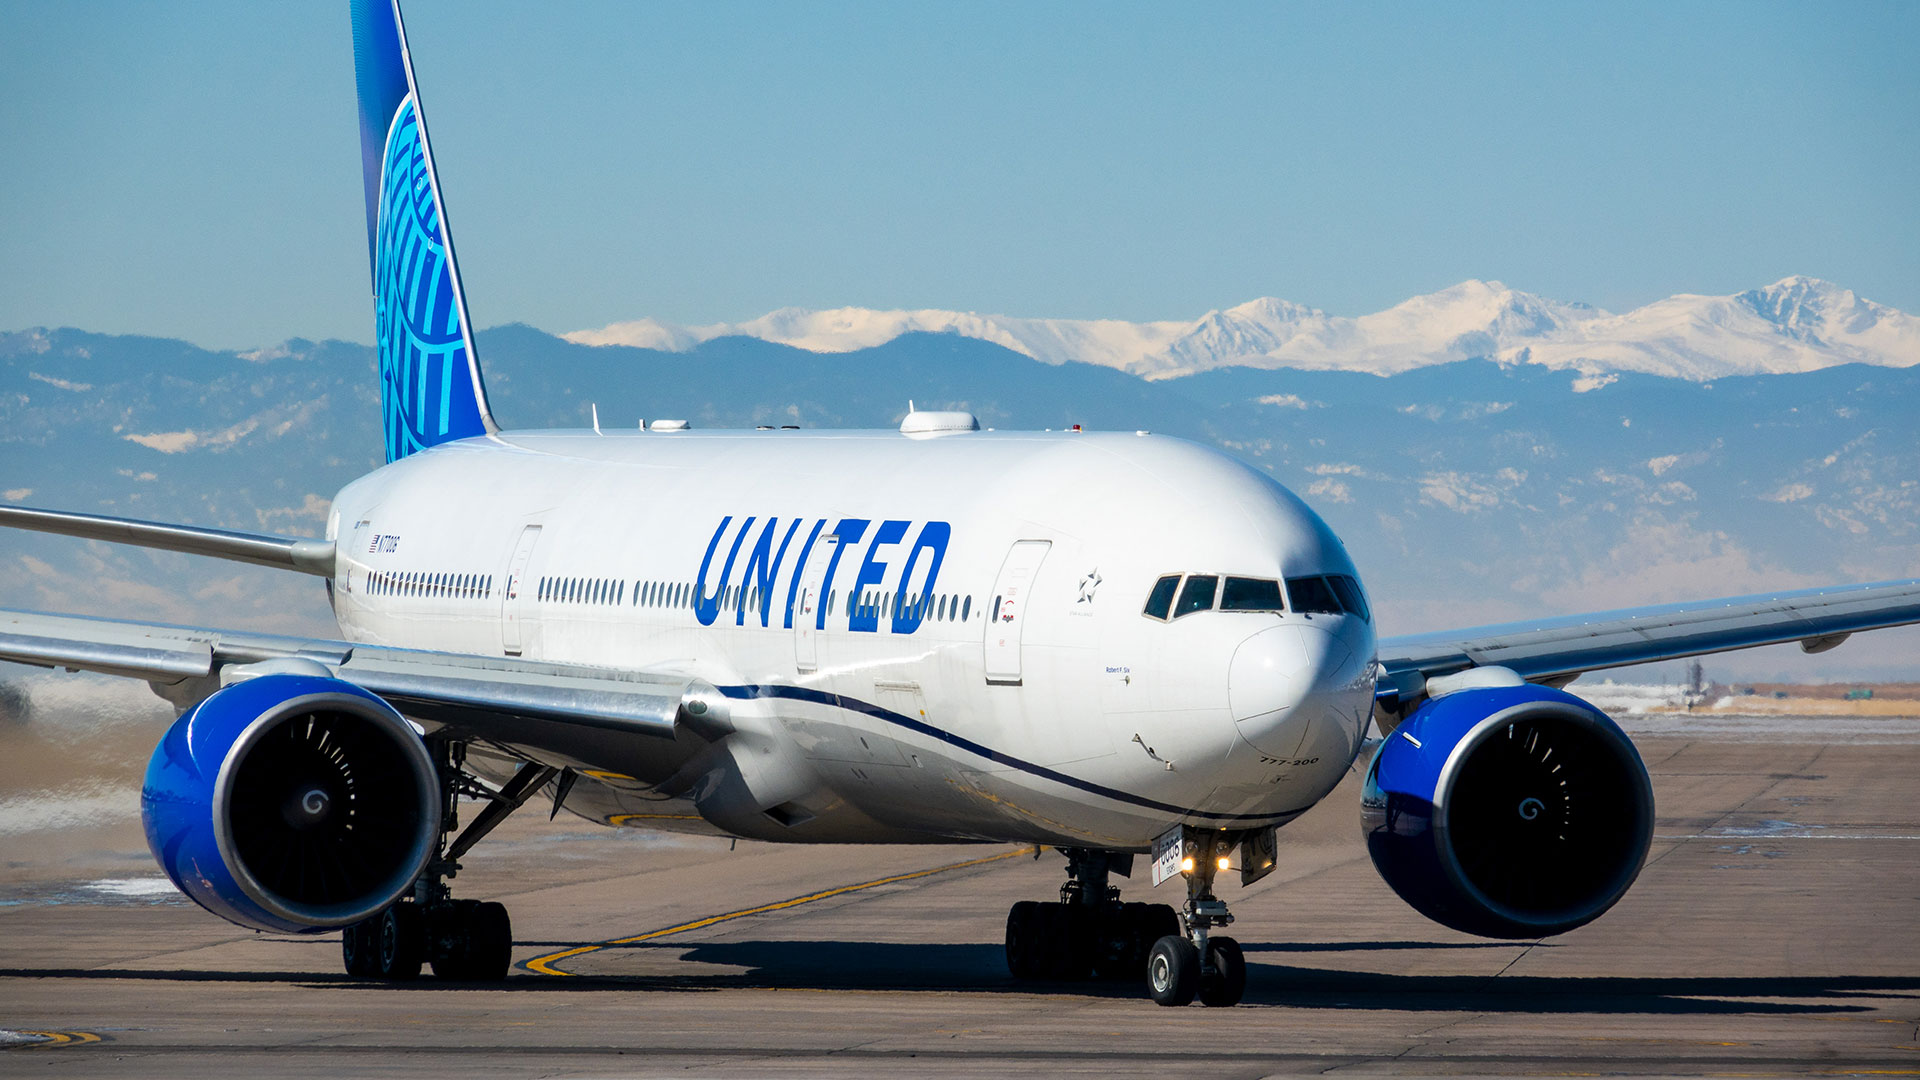 United Airlines plane on runway at Denver International Airport